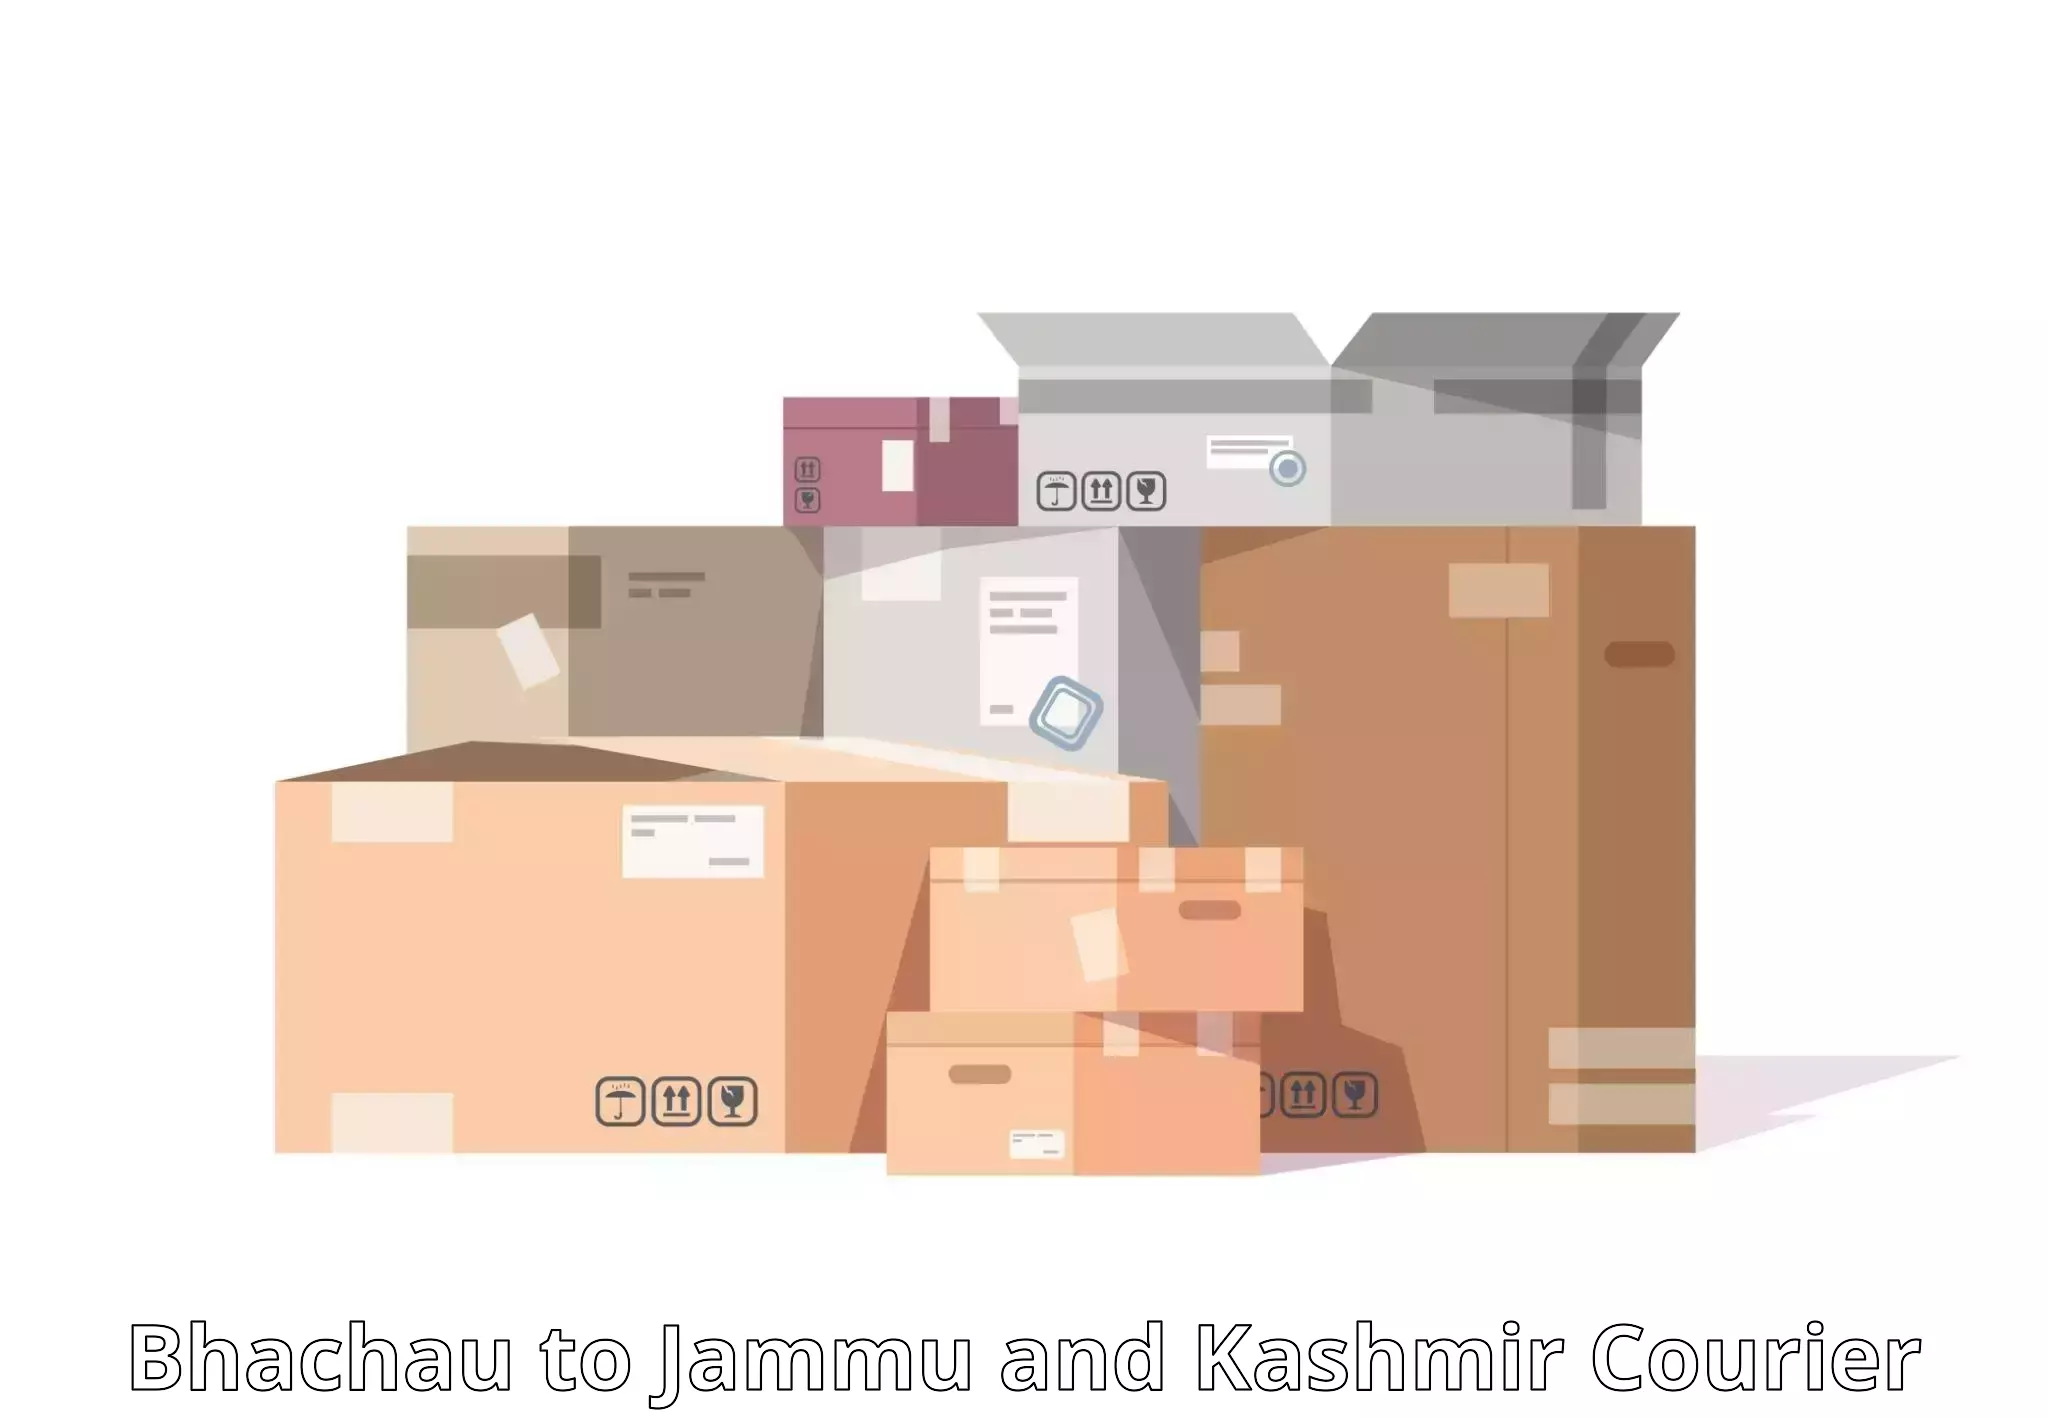 Subscription-based courier Bhachau to Rajouri